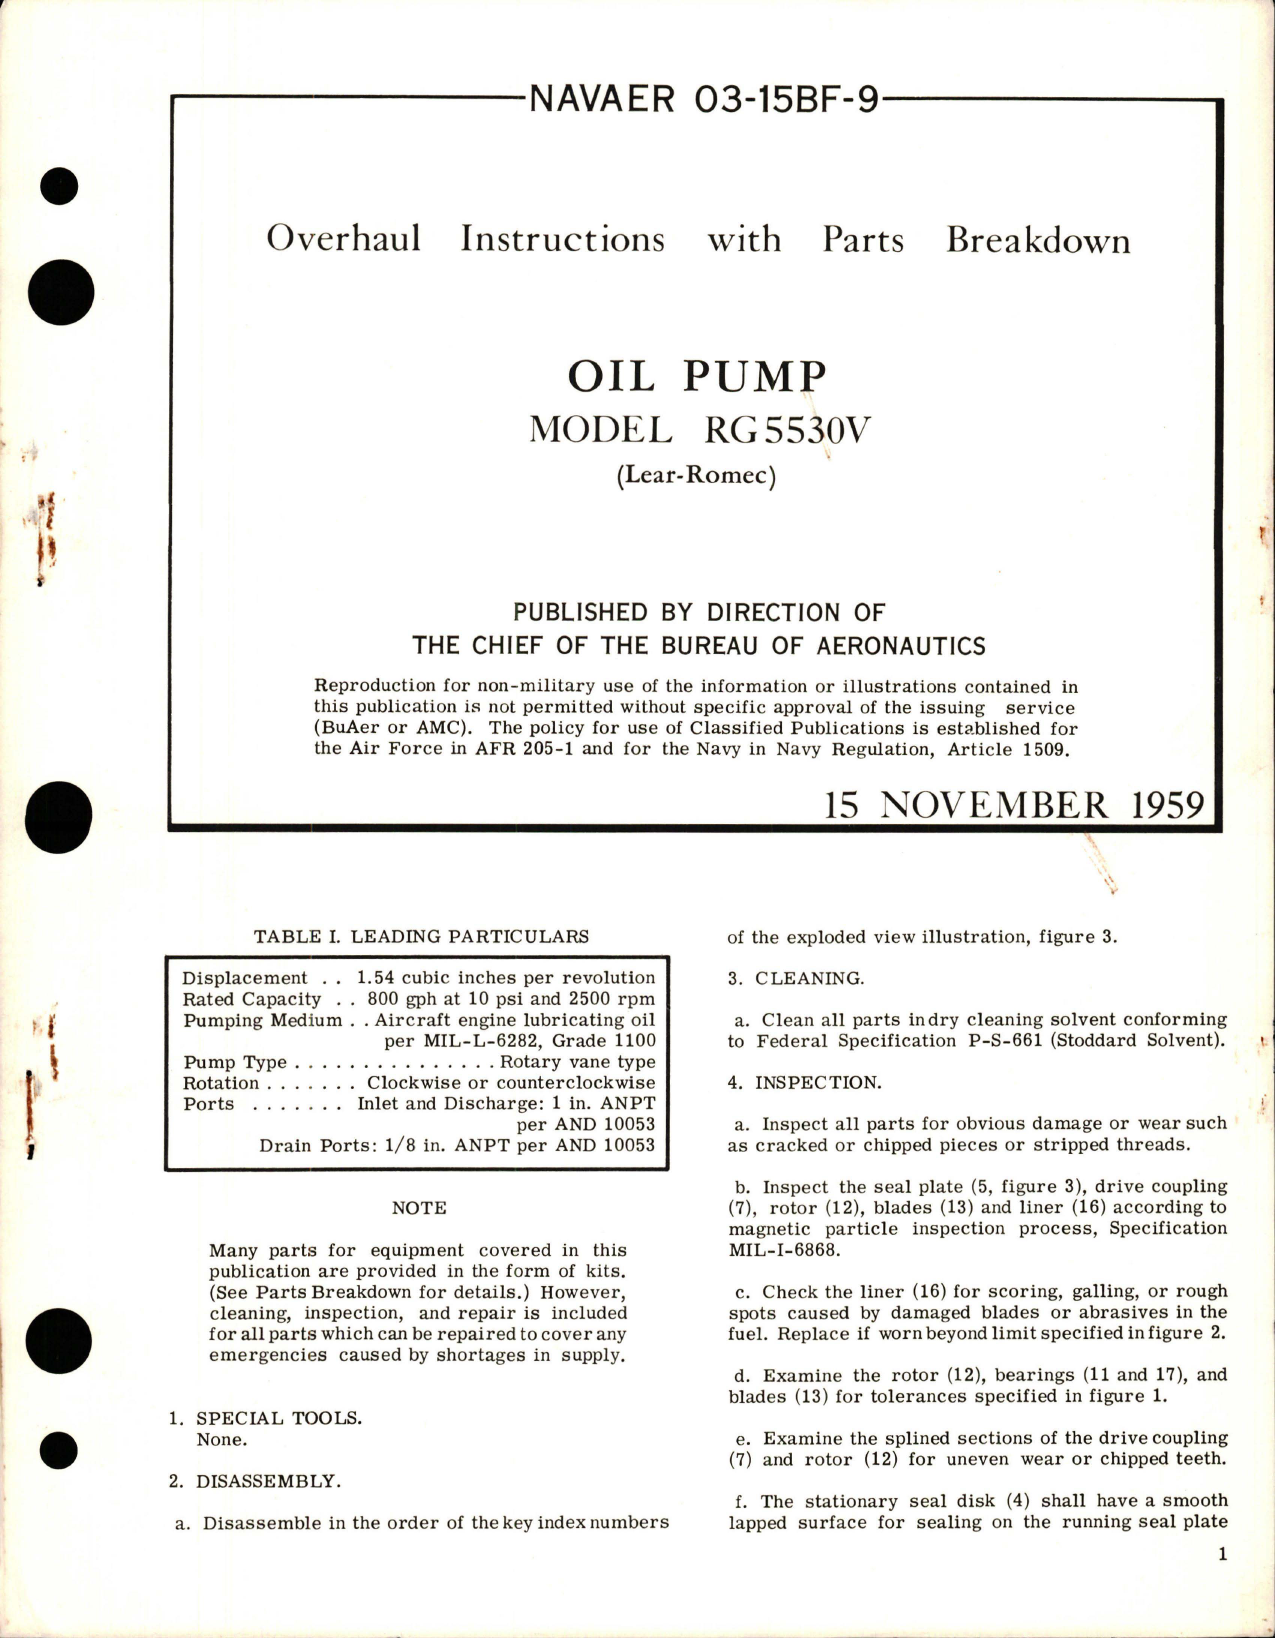 Sample page 1 from AirCorps Library document: Overhaul Instructions with Parts for Oil Pump - Model RG5530V